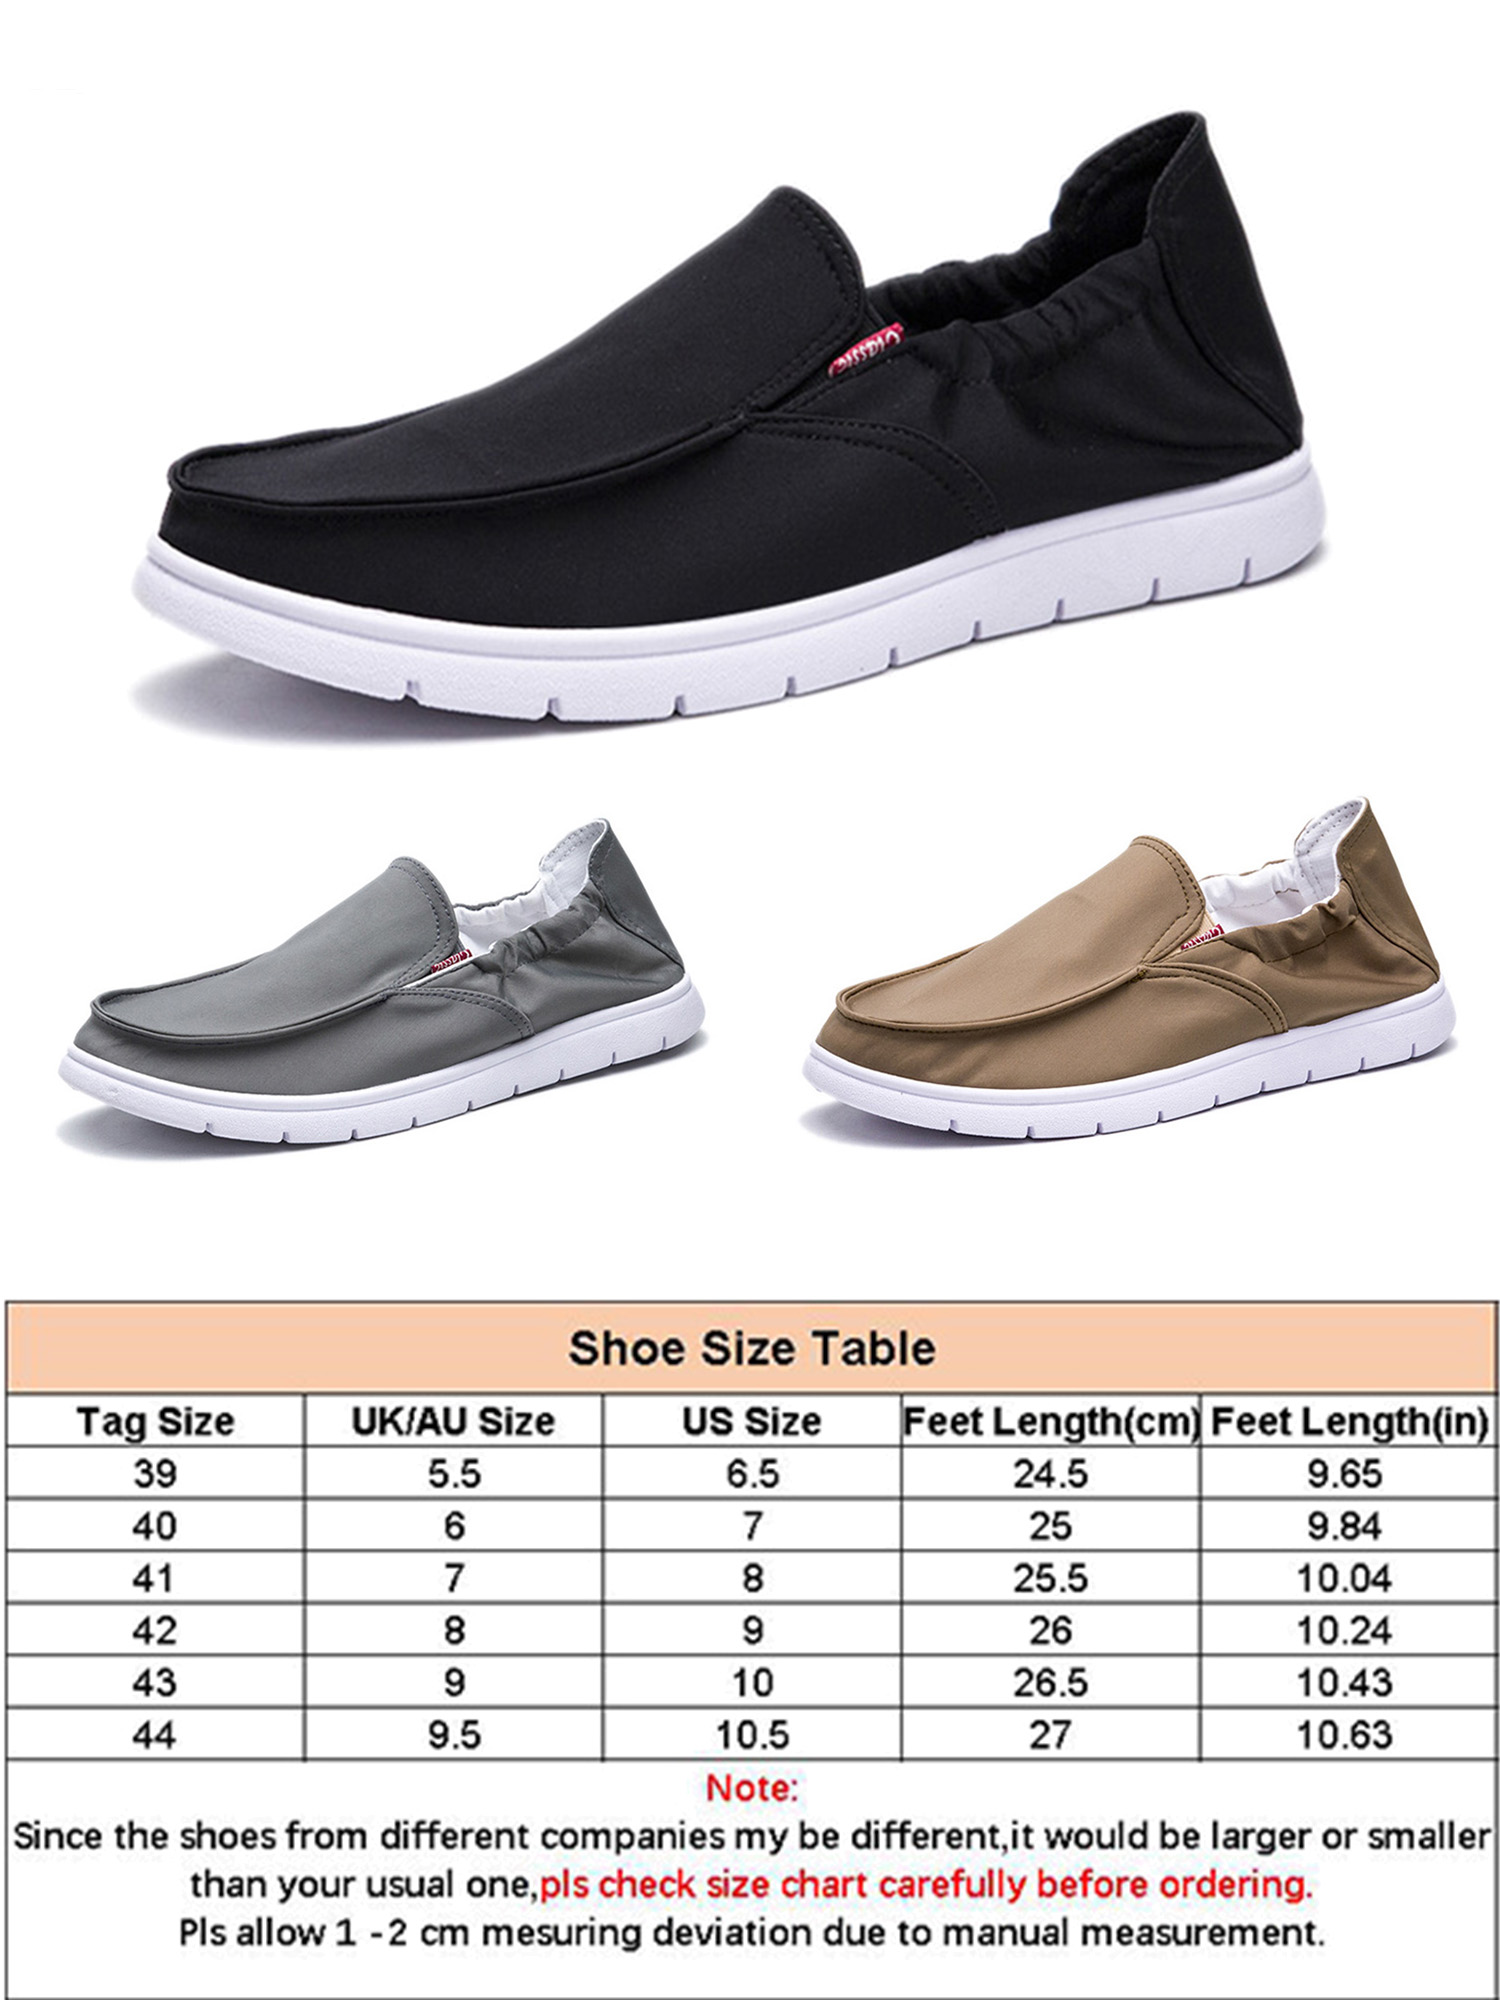 UKAP Casual Canvas Shoes for Men Slip On Loafers Deck Shoes Comfortable Boat Shoes Outdoor Fashion - image 2 of 5